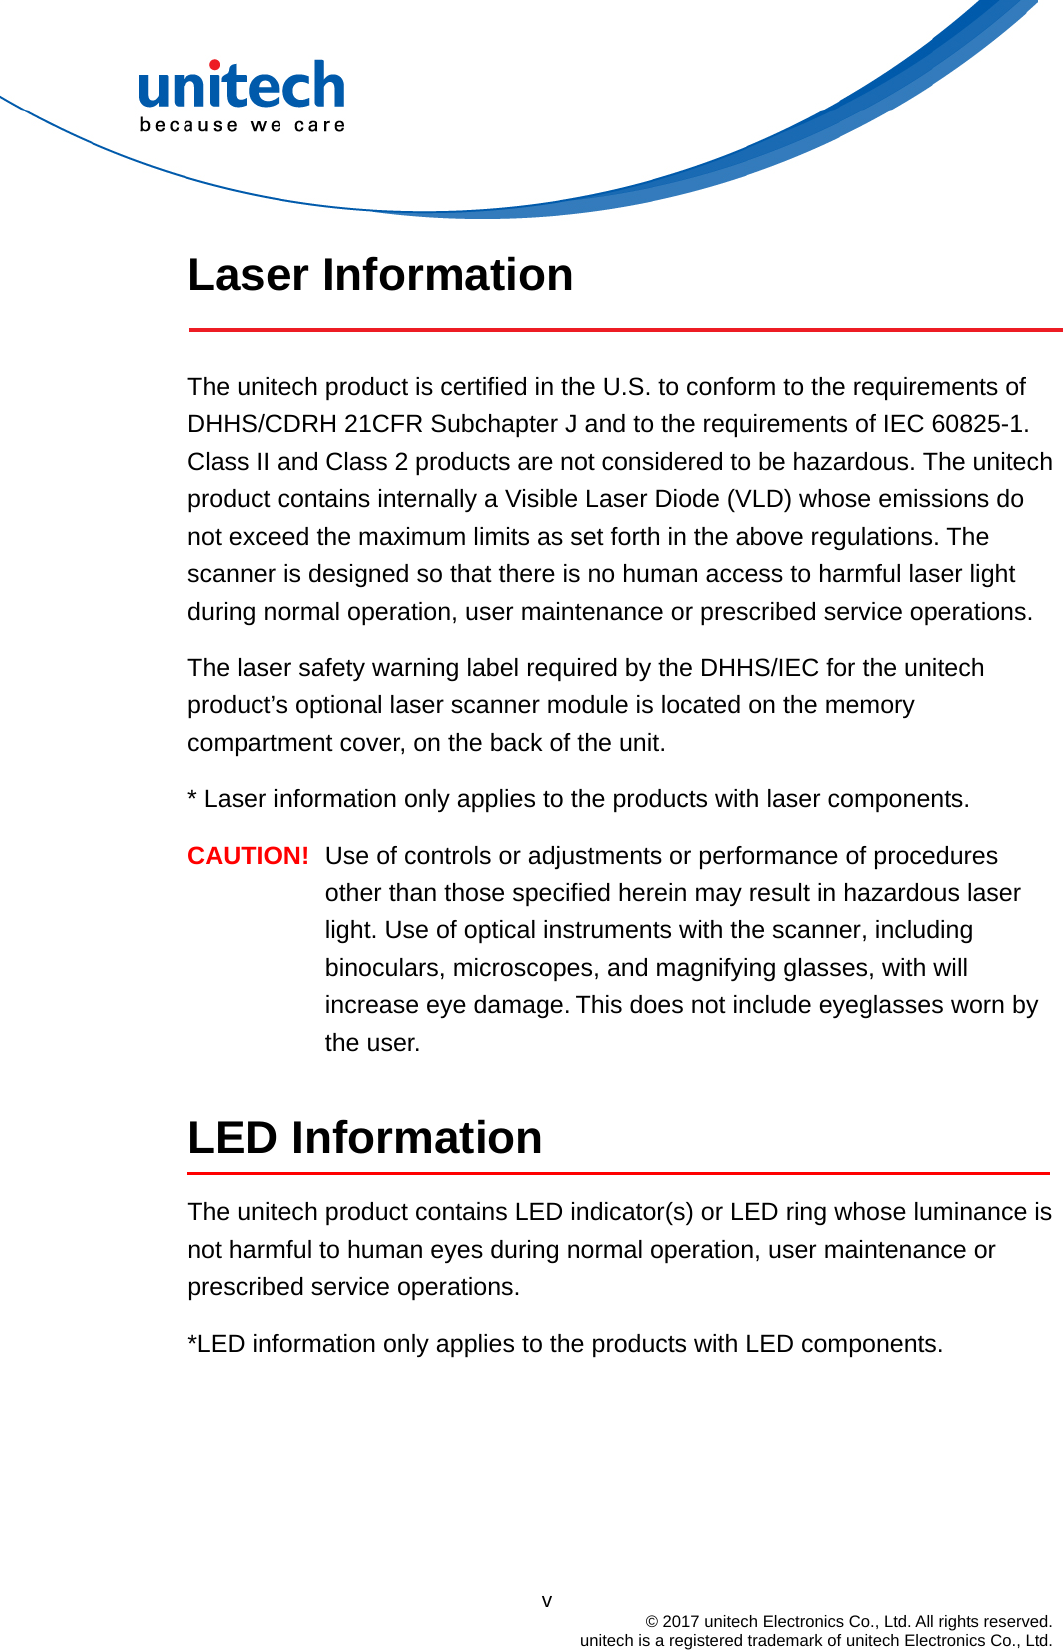  Laser Information  The unitech product is certified in the U.S. to conform to the requirements of DHHS/CDRH 21CFR Subchapter J and to the requirements of IEC 60825-1. Class II and Class 2 products are not considered to be hazardous. The unitech product contains internally a Visible Laser Diode (VLD) whose emissions do not exceed the maximum limits as set forth in the above regulations. The scanner is designed so that there is no human access to harmful laser light during normal operation, user maintenance or prescribed service operations. The laser safety warning label required by the DHHS/IEC for the unitech product’s optional laser scanner module is located on the memory compartment cover, on the back of the unit. * Laser information only applies to the products with laser components. CAUTION!  Use of controls or adjustments or performance of procedures other than those specified herein may result in hazardous laser light. Use of optical instruments with the scanner, including binoculars, microscopes, and magnifying glasses, with will increase eye damage. This does not include eyeglasses worn by the user.  LED Information The unitech product contains LED indicator(s) or LED ring whose luminance is not harmful to human eyes during normal operation, user maintenance or prescribed service operations.   *LED information only applies to the products with LED components.                                          v  © 2017 unitech Electronics Co., Ltd. All rights reserved.   unitech is a registered trademark of unitech Electronics Co., Ltd. 